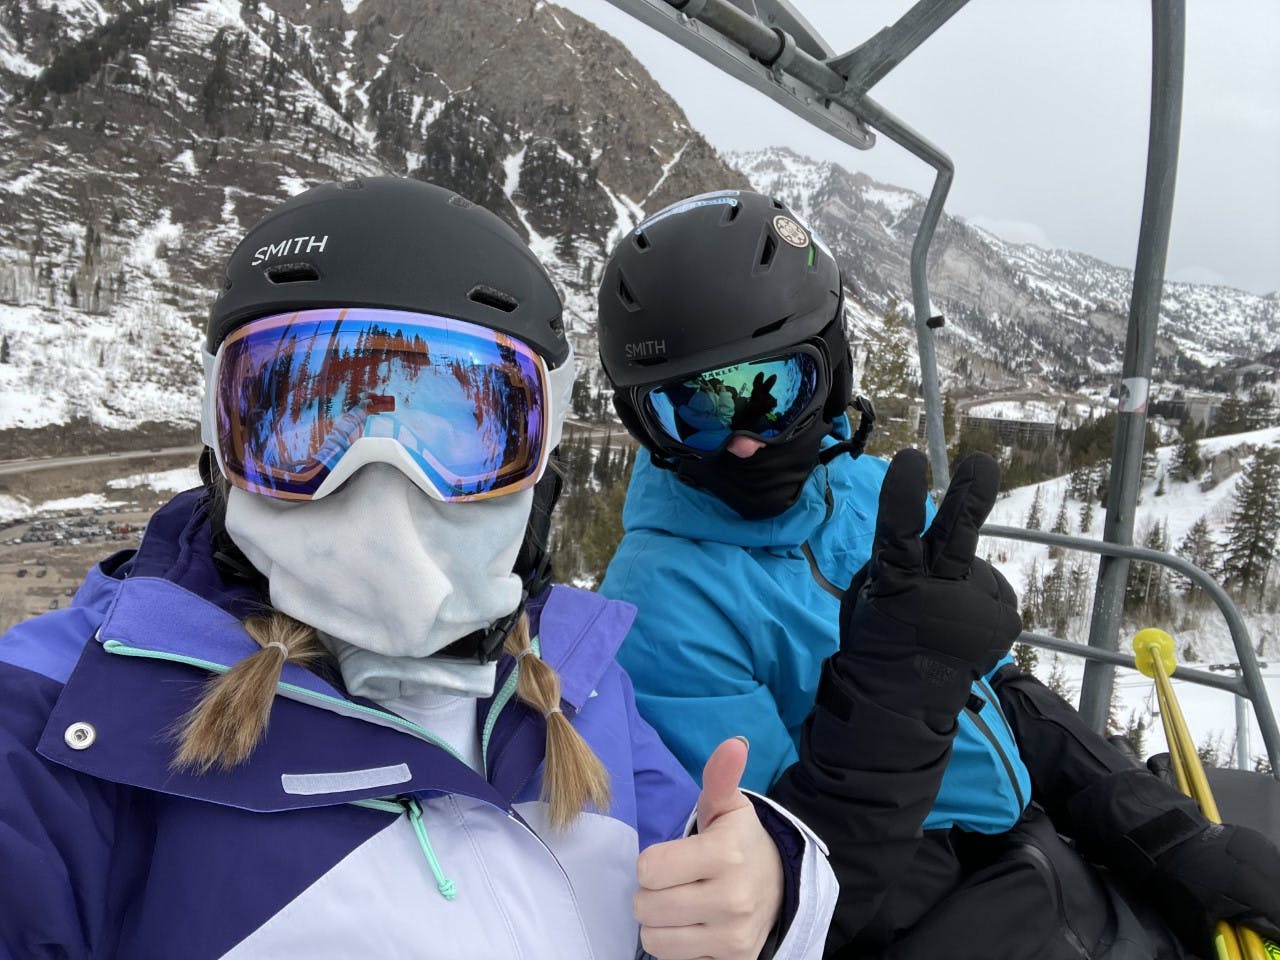 Two people sit on a charlift at a ski resort.